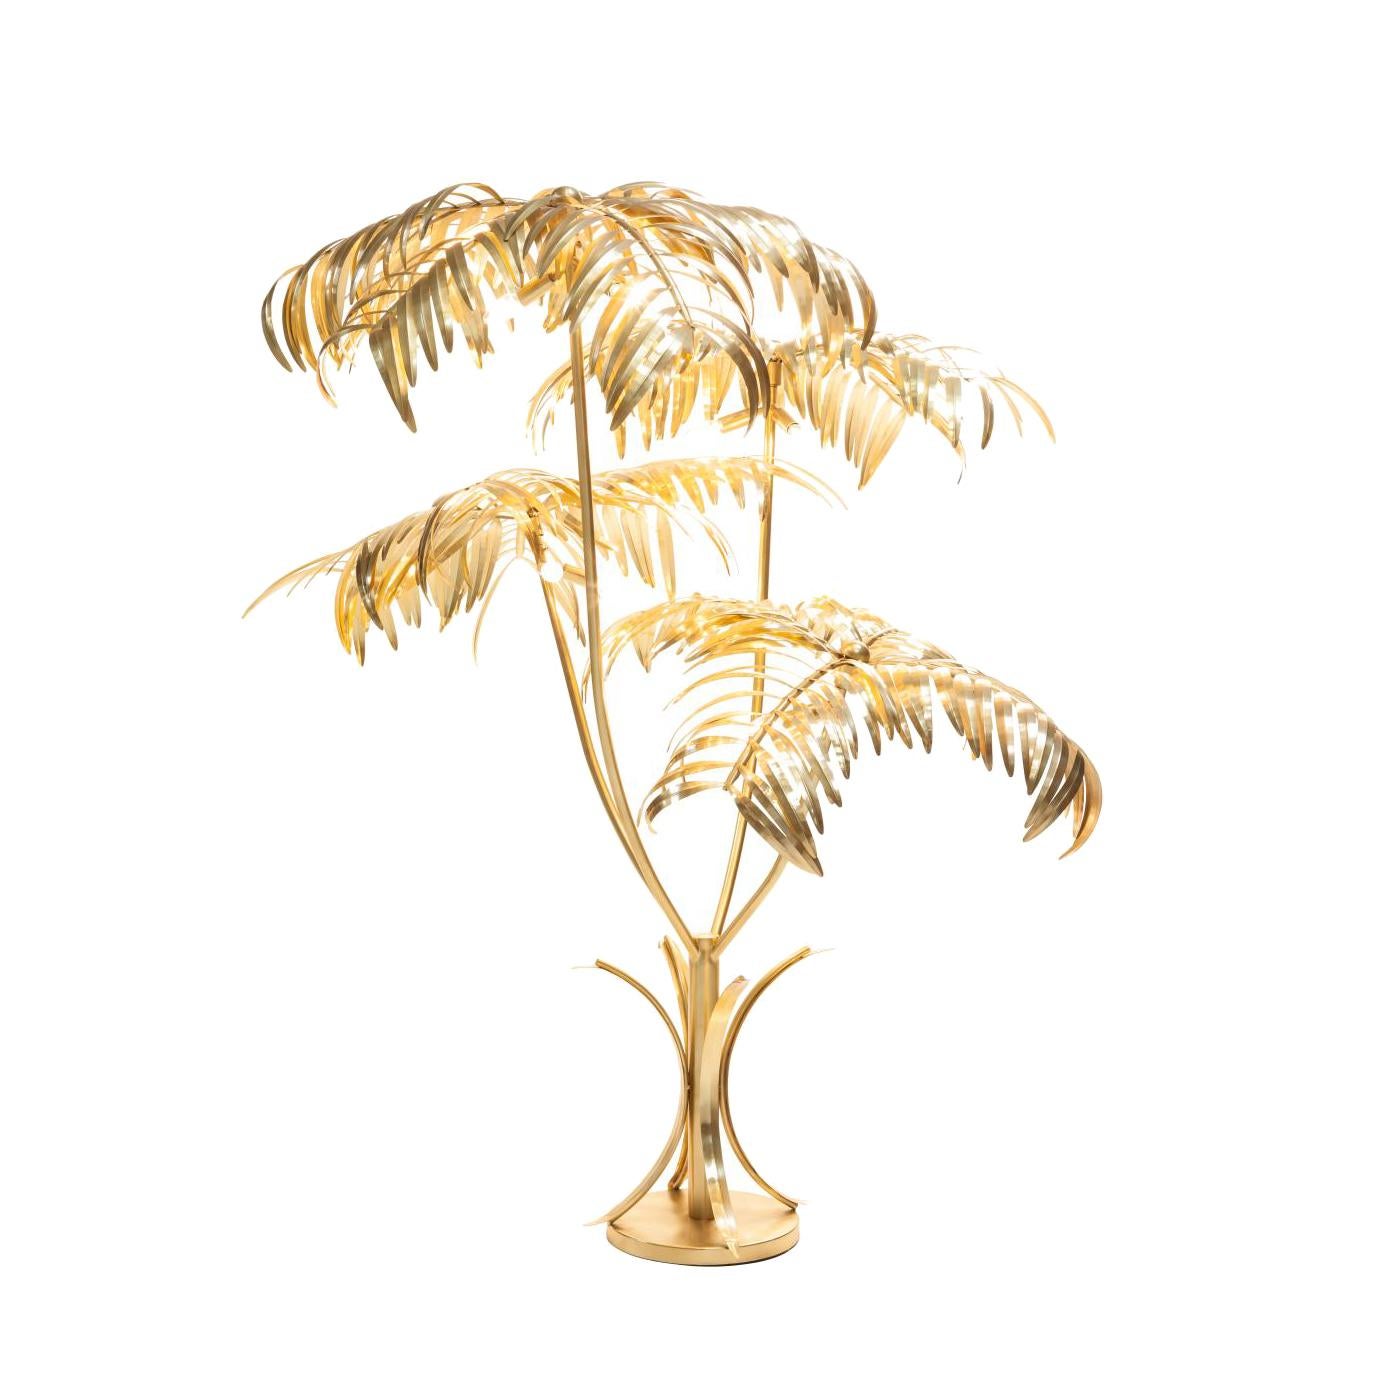 This ornate handcrafted floor lamp will bring a tropical touch to any space, thanks to its branches crafted entirely of polished brass. The base, also in brass, is composed of a circular plate with four curved elements supporting a cylindrical rod,